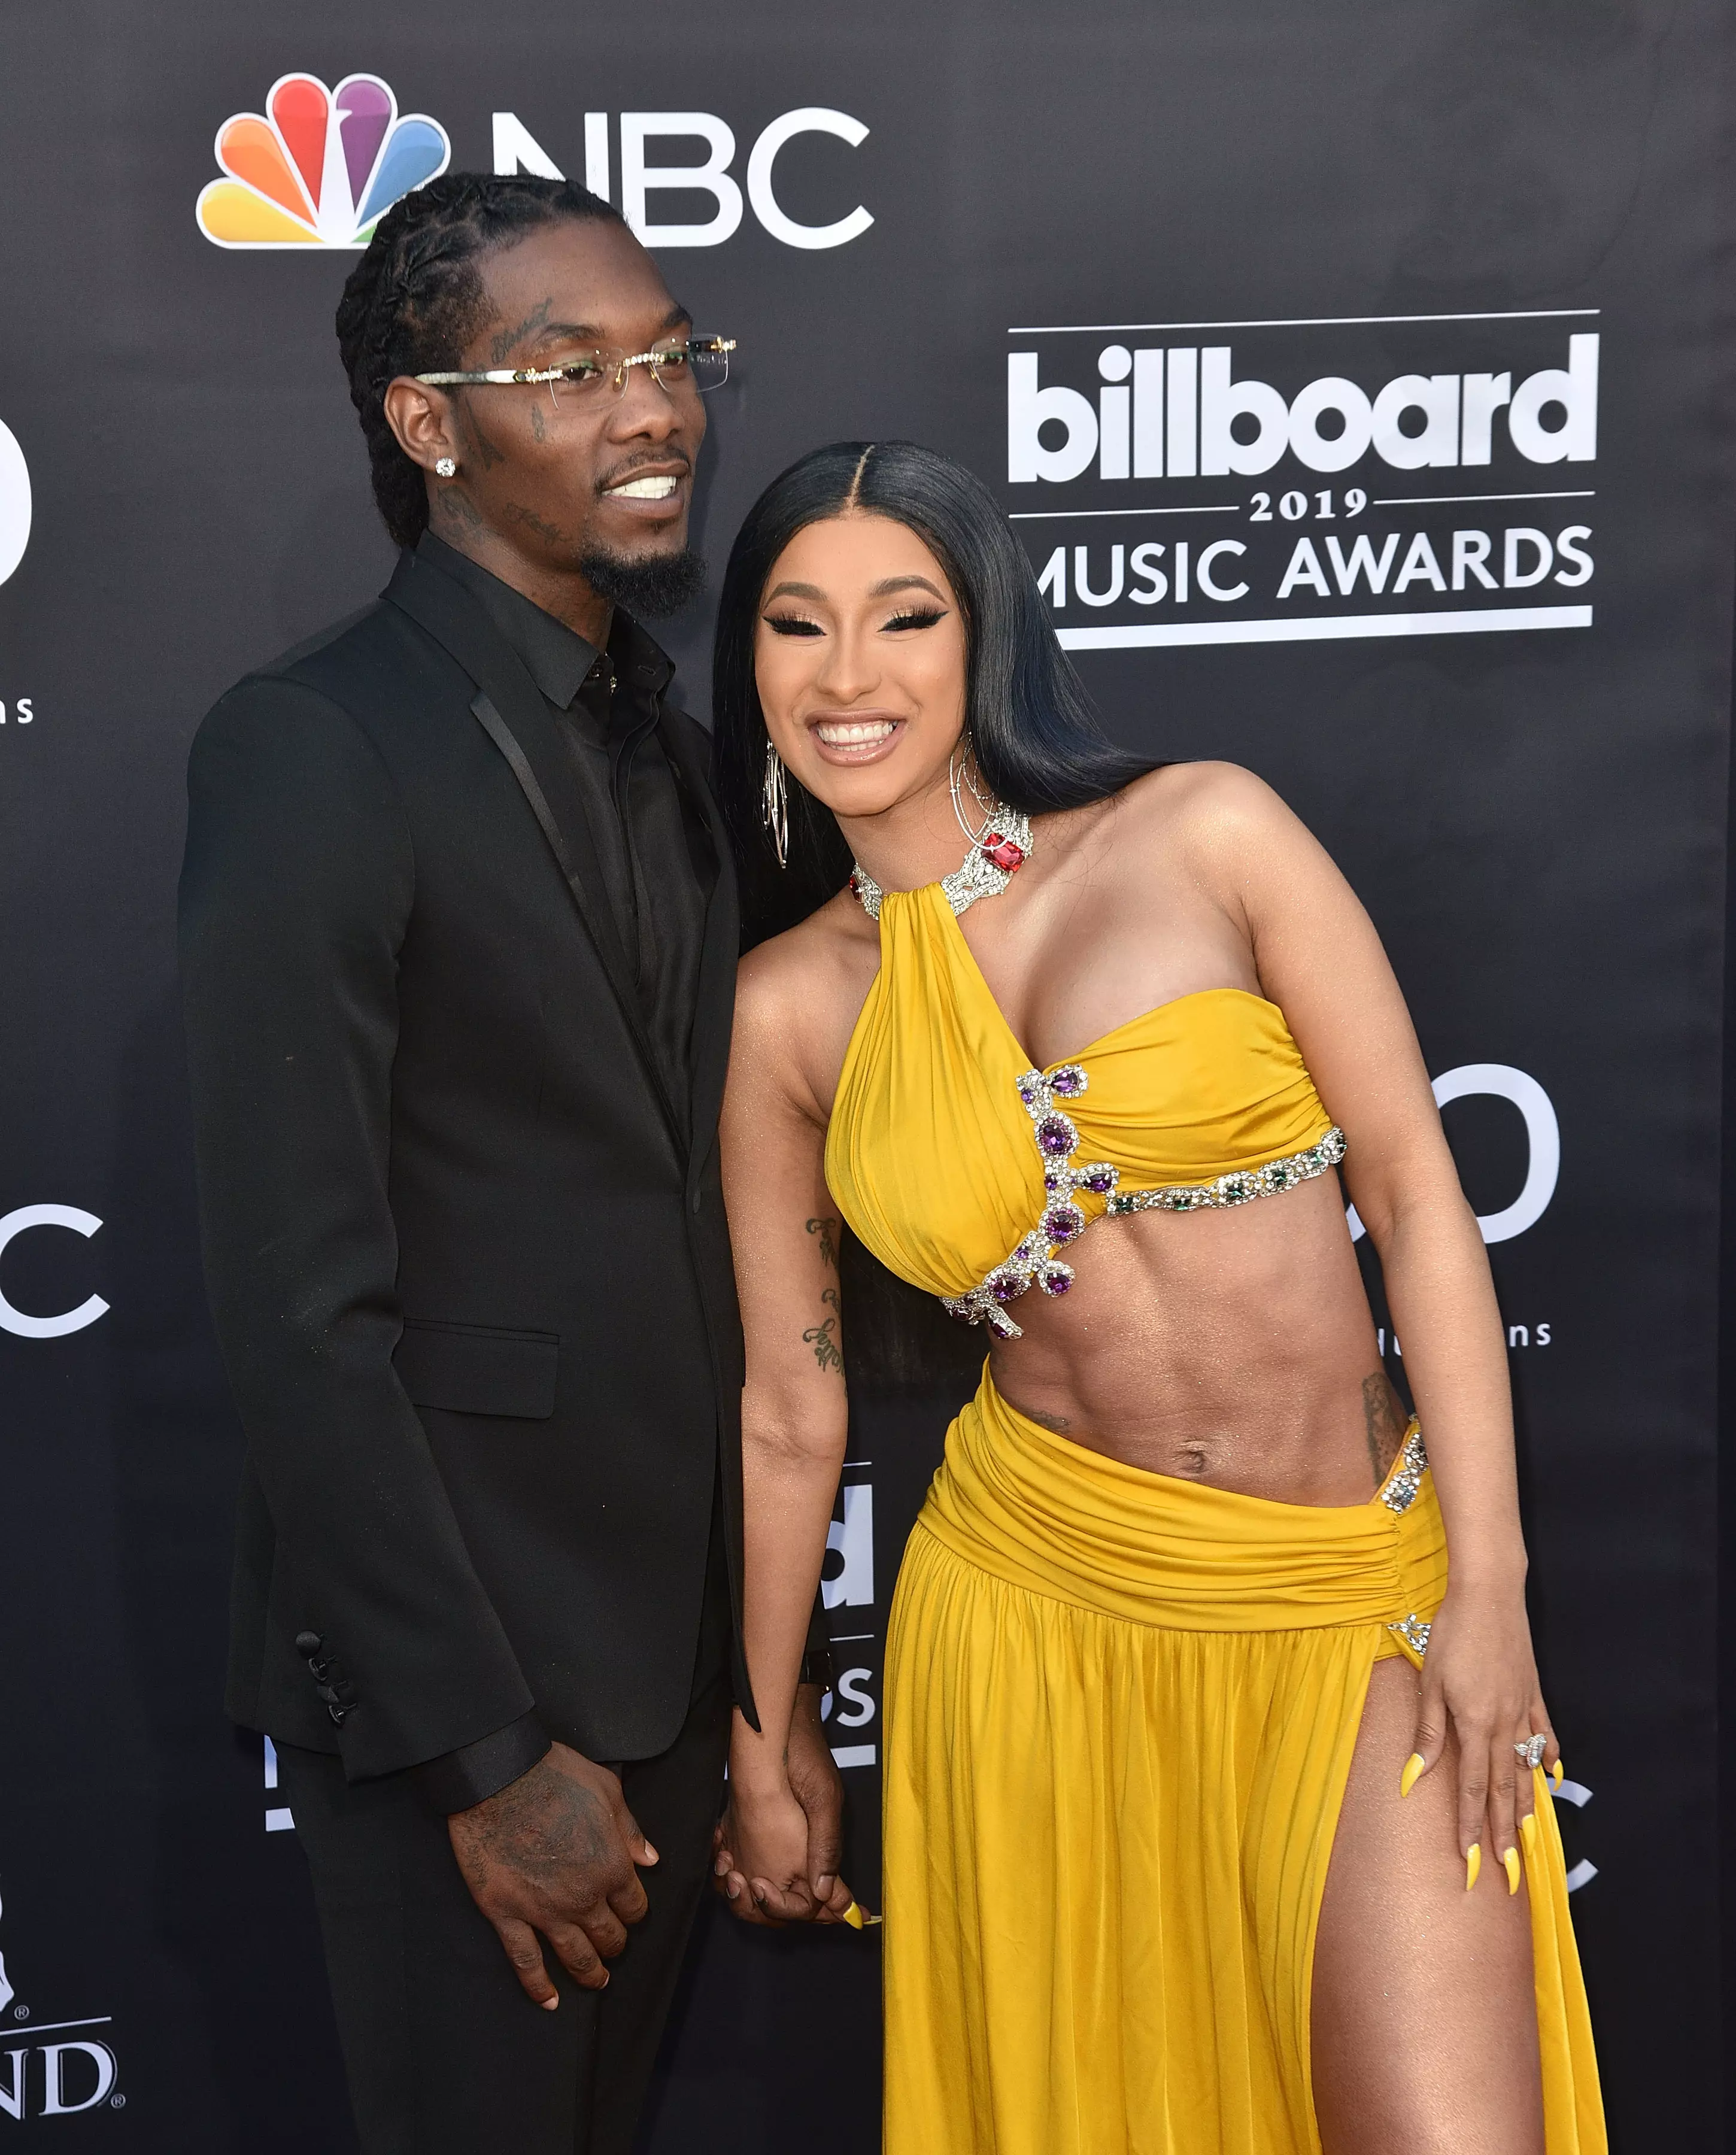 Cardi and Offset at the Billboard Awards 2019.